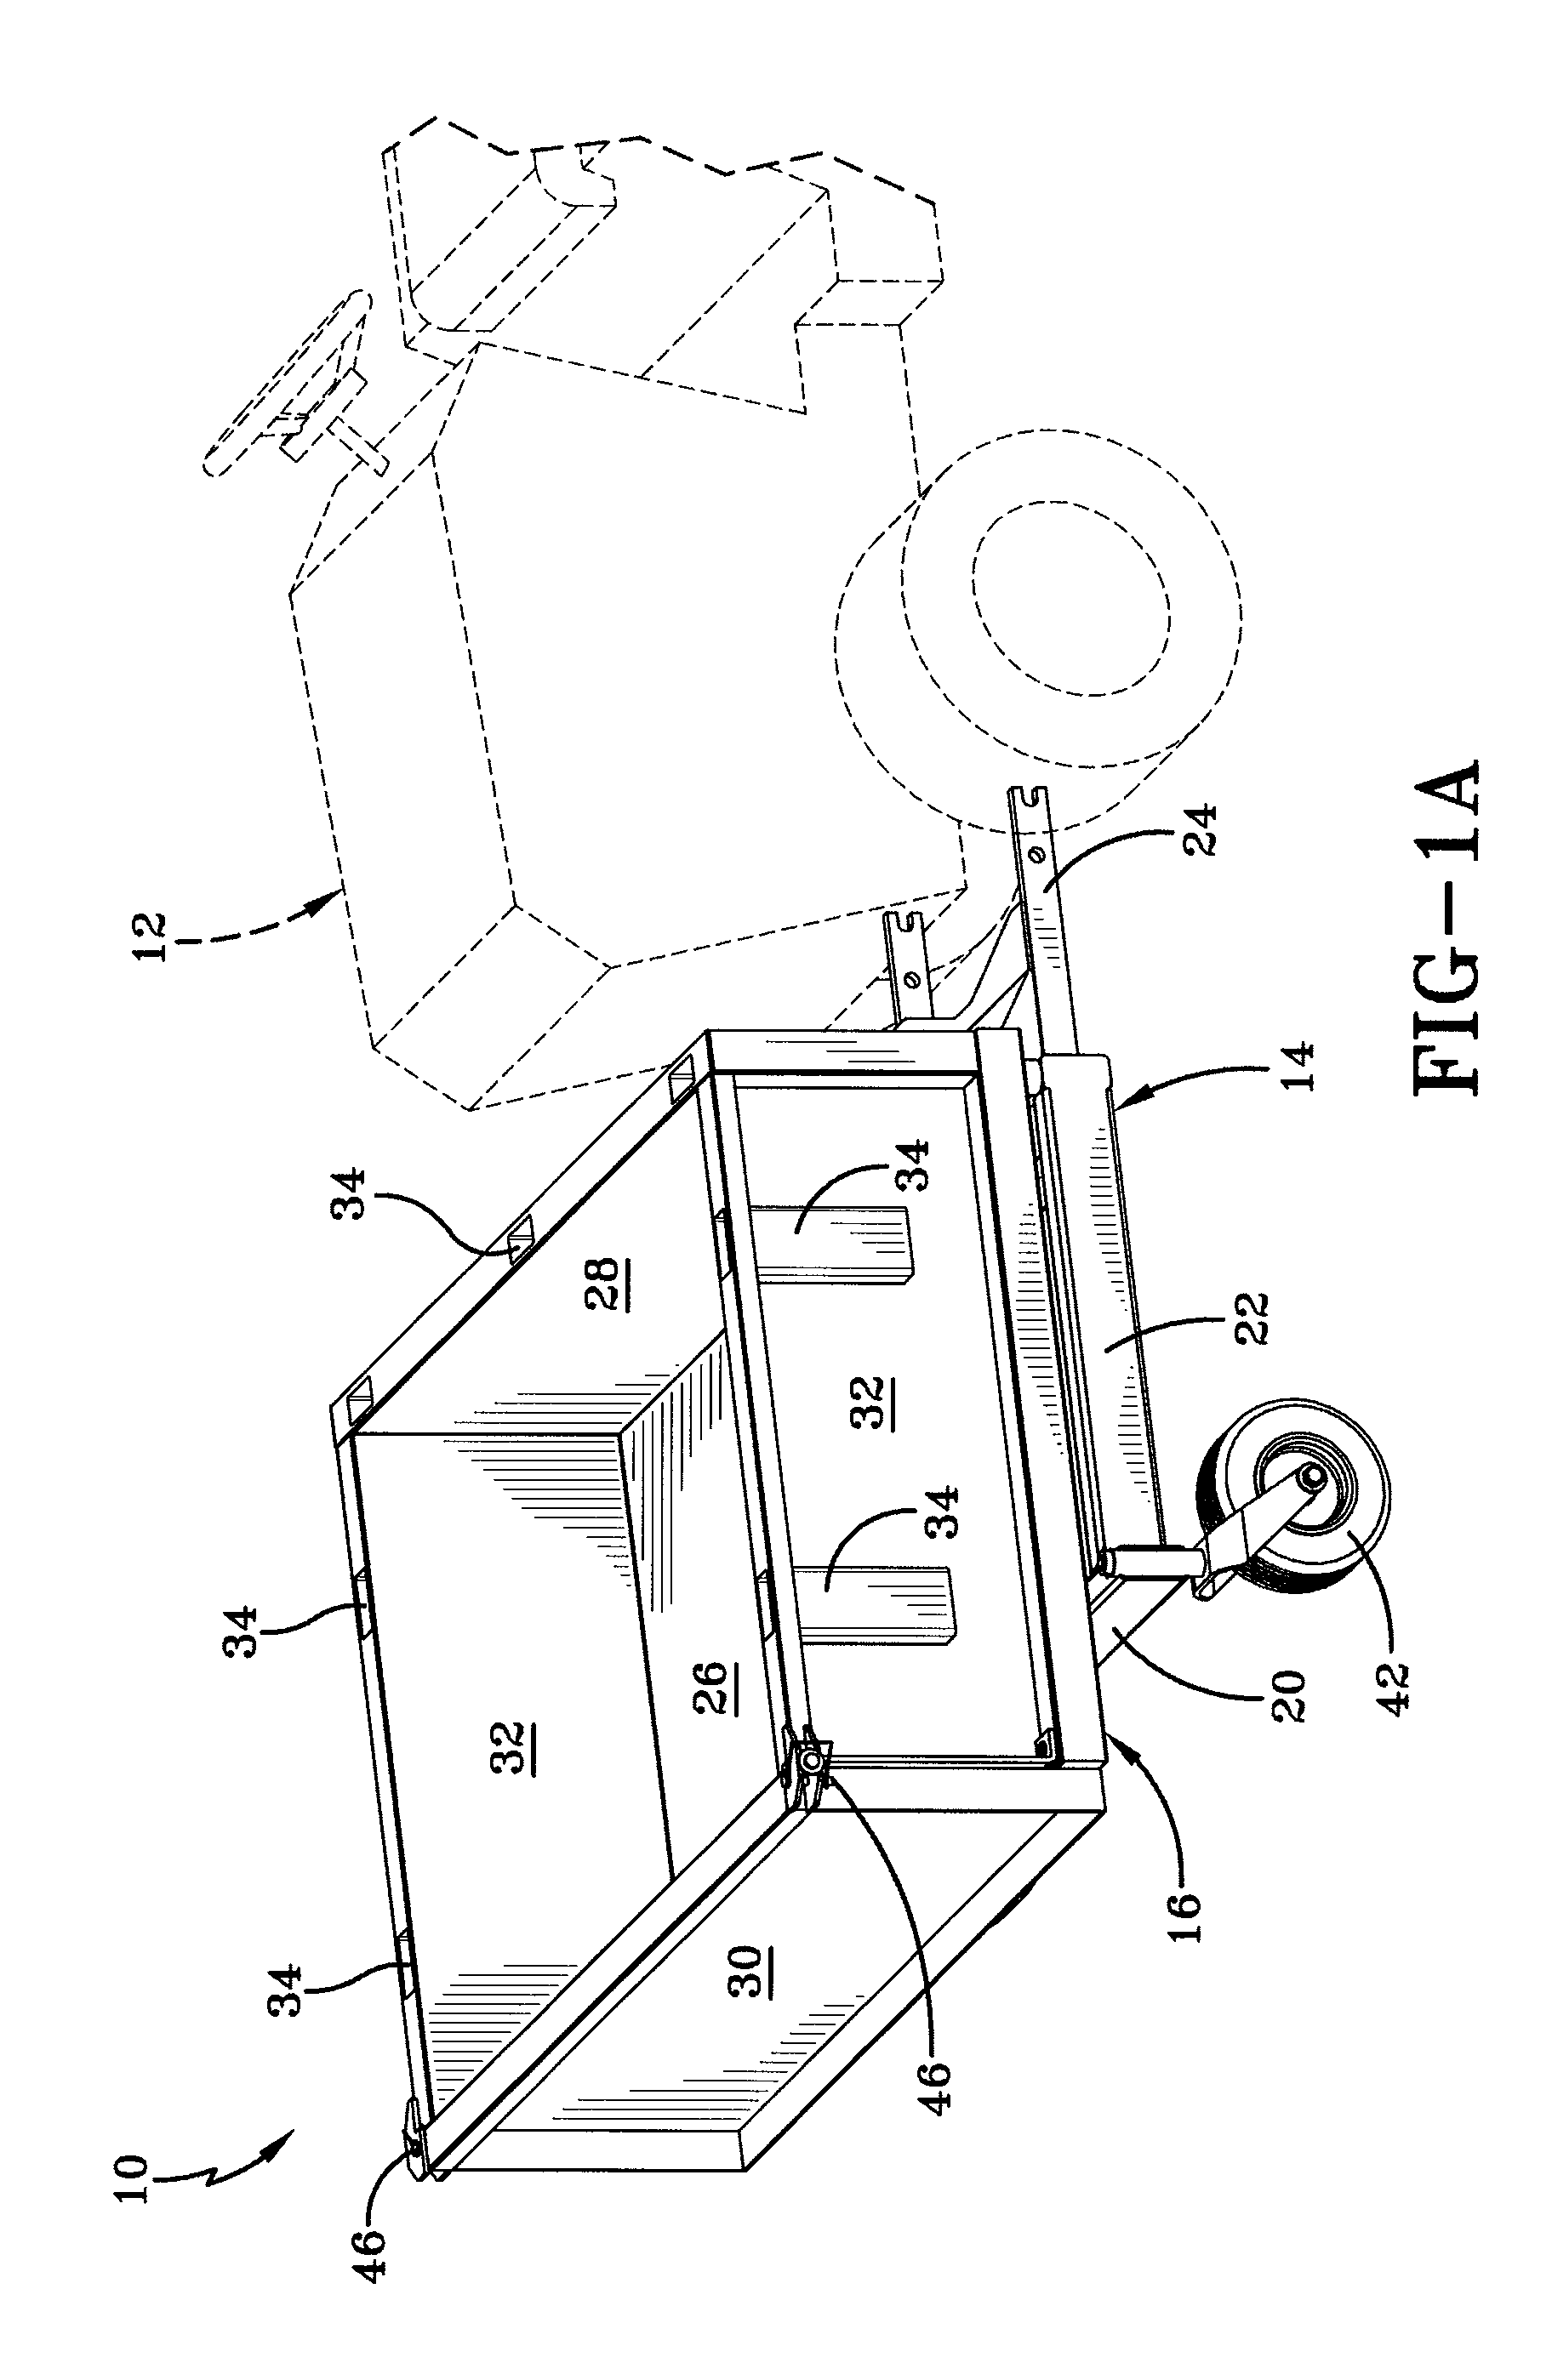 Cargo hauling attachment for a tractor